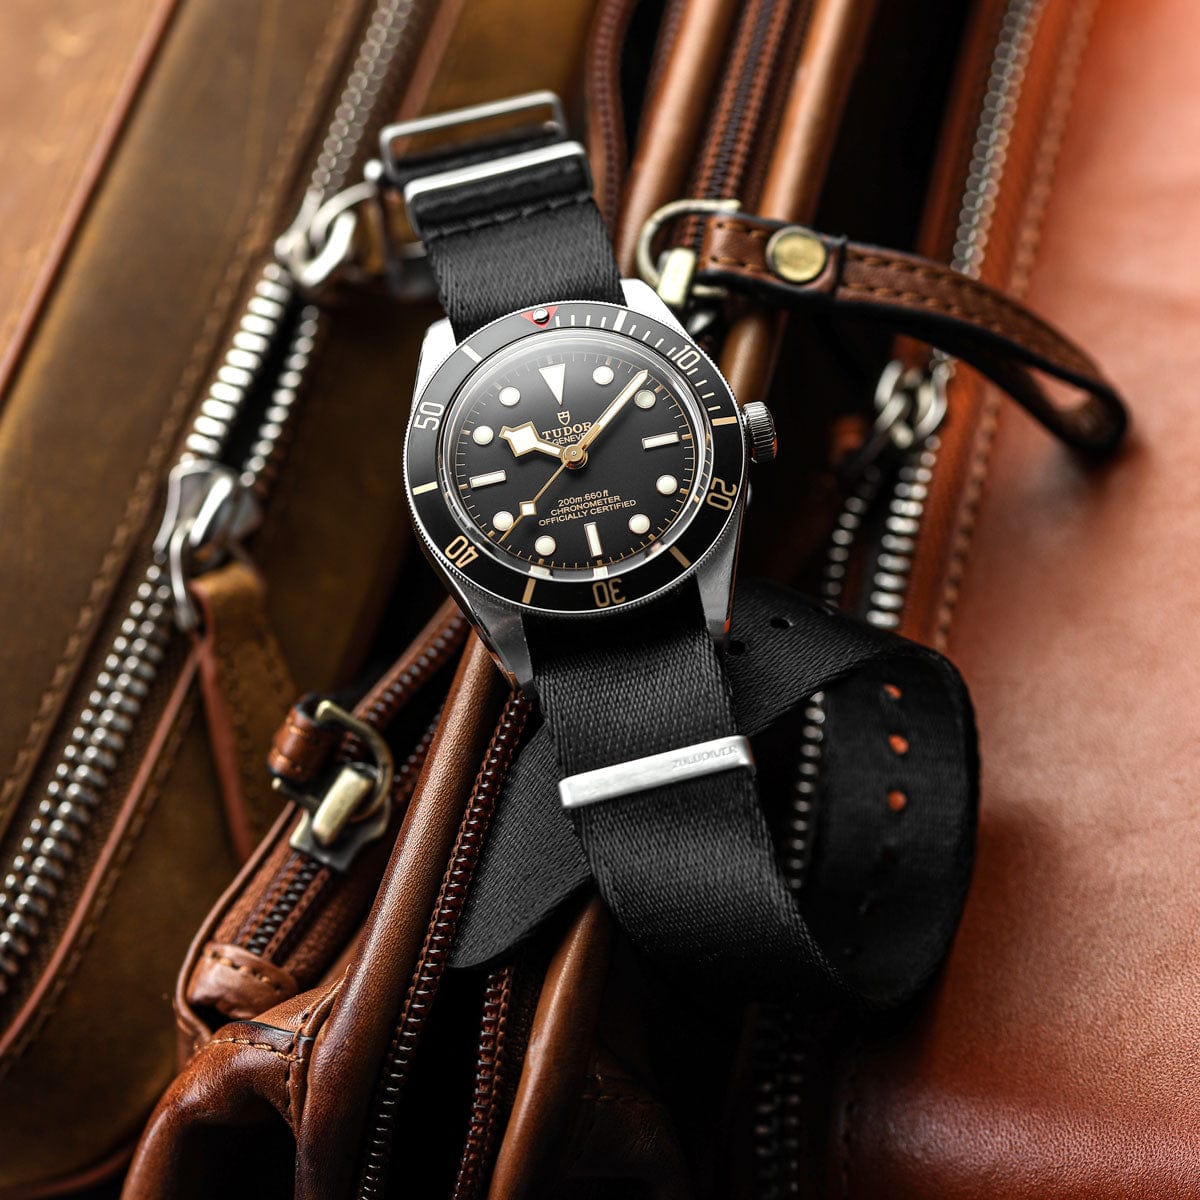 ZULUDIVER 1973 British Military Watch Strap: ARMOURED RECON - Military Black, Polished